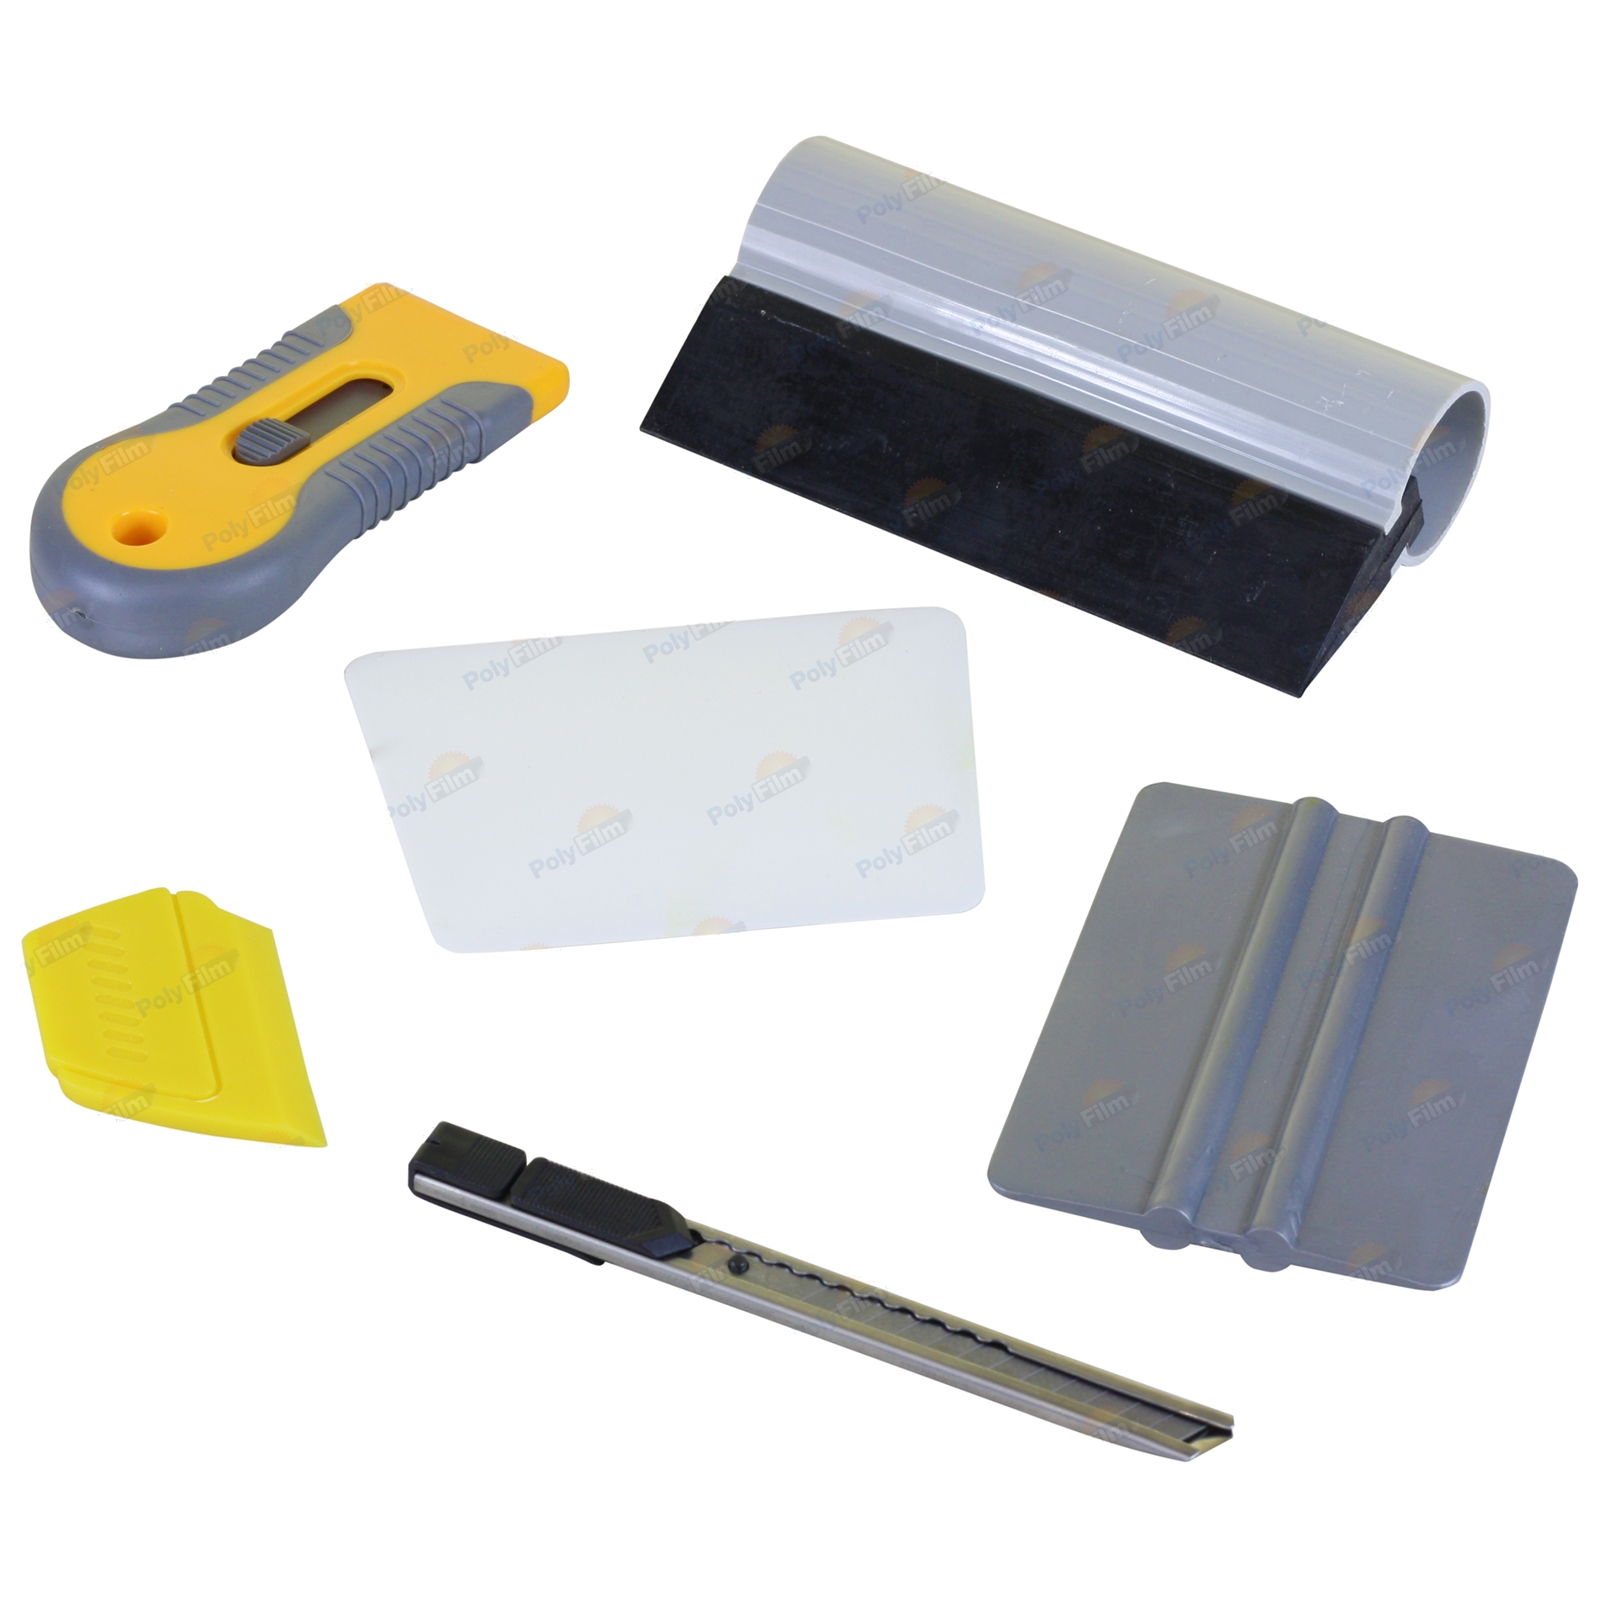 6pc Professional Window Tint Tools Kit for House / Office Film